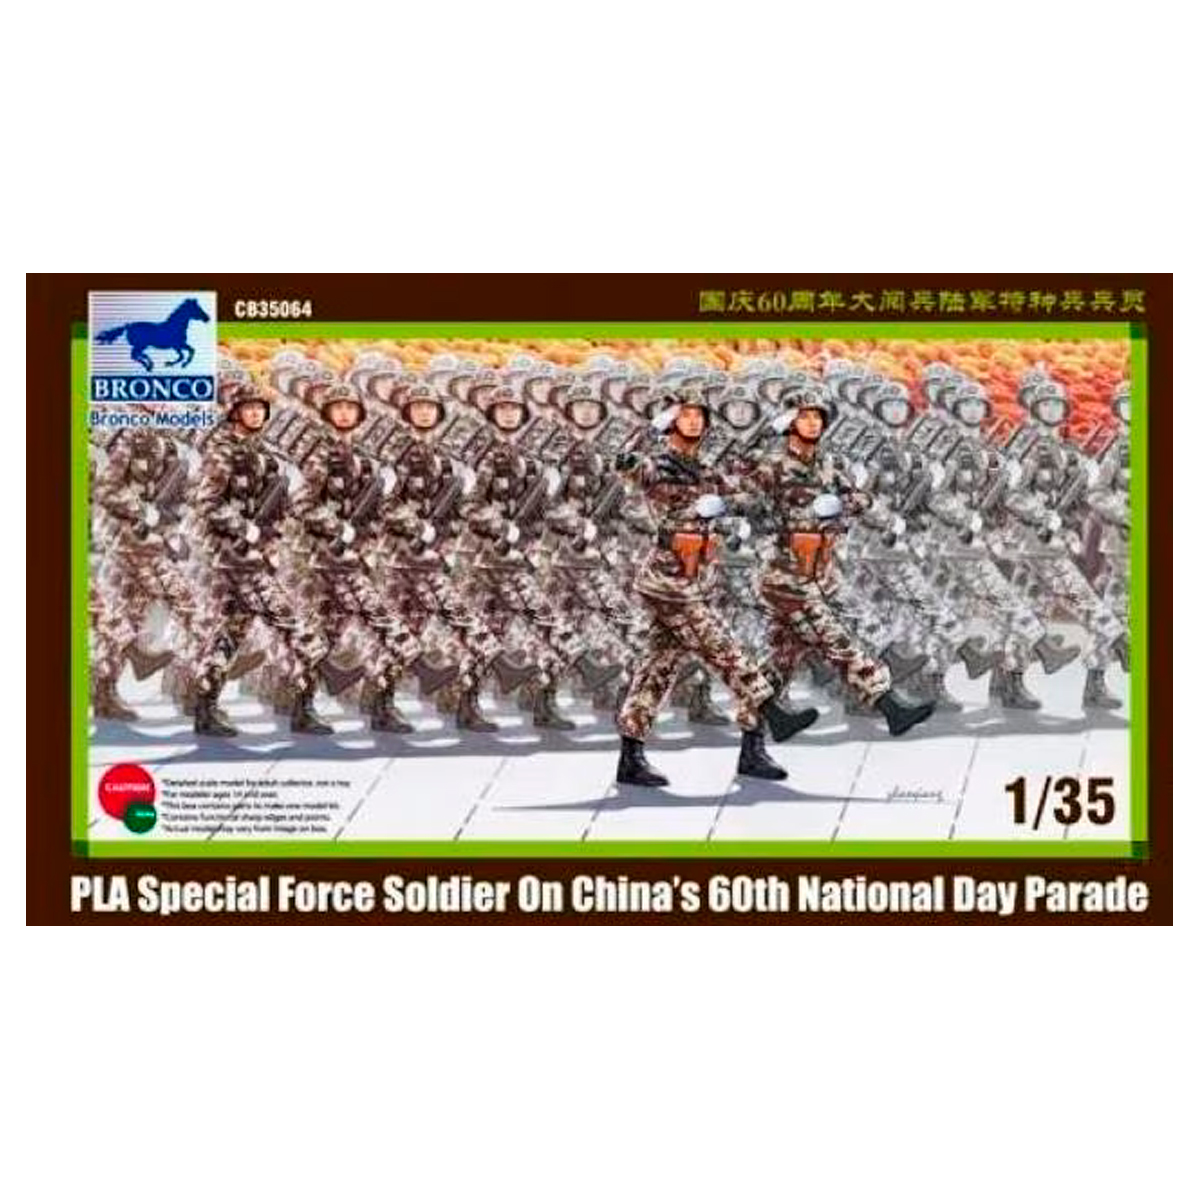 1/35 PLA Special Force Soldier on China’s 60th National Day Parade